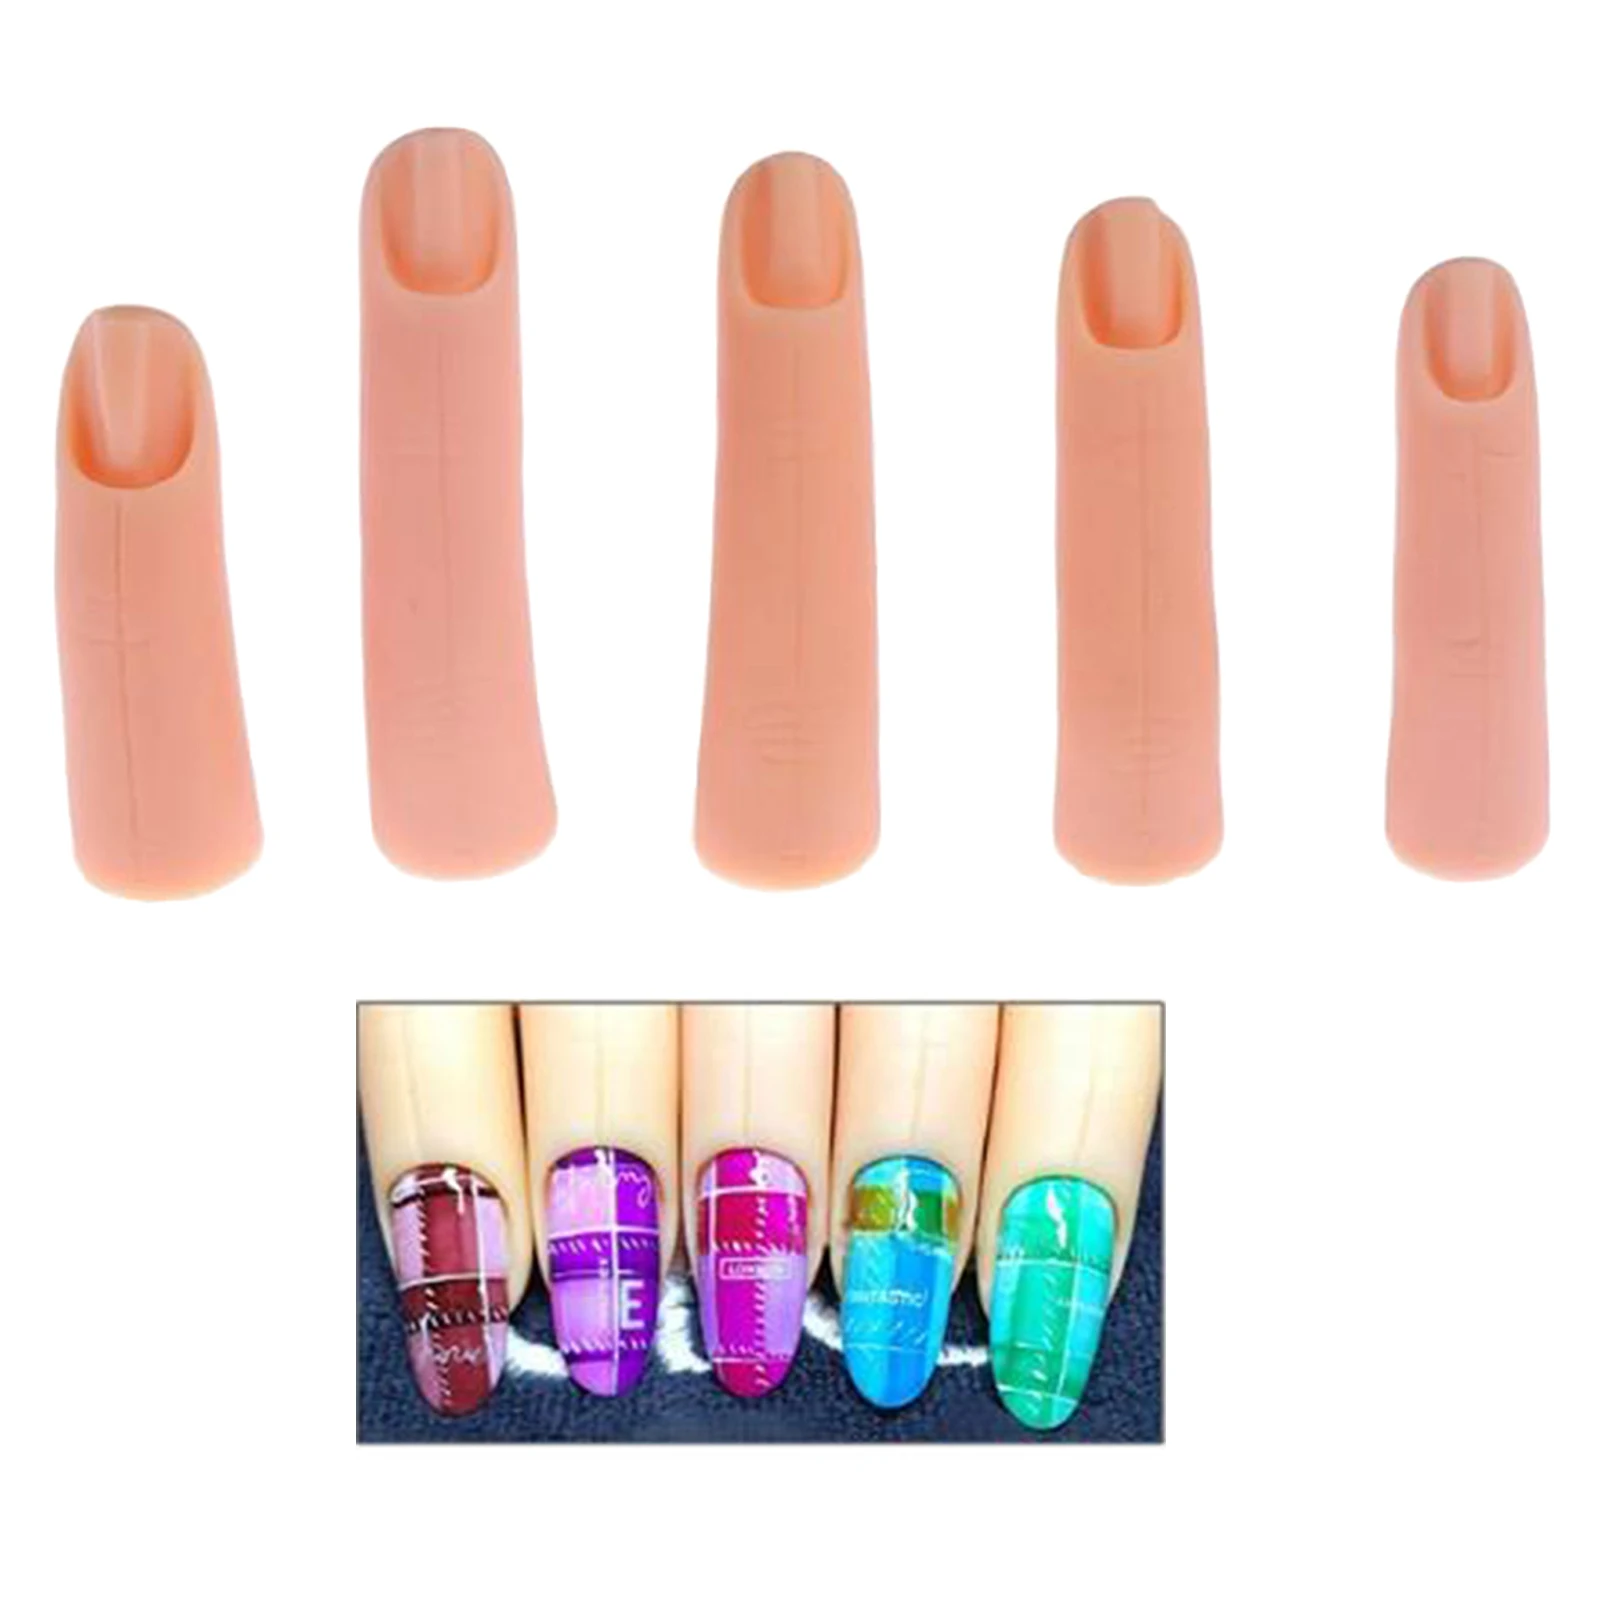 Nail Art Trainer Training Hand Fingers Model Fake Finger Manicure Tool Acrylic Nails Practice Fingers Practice Training Tools